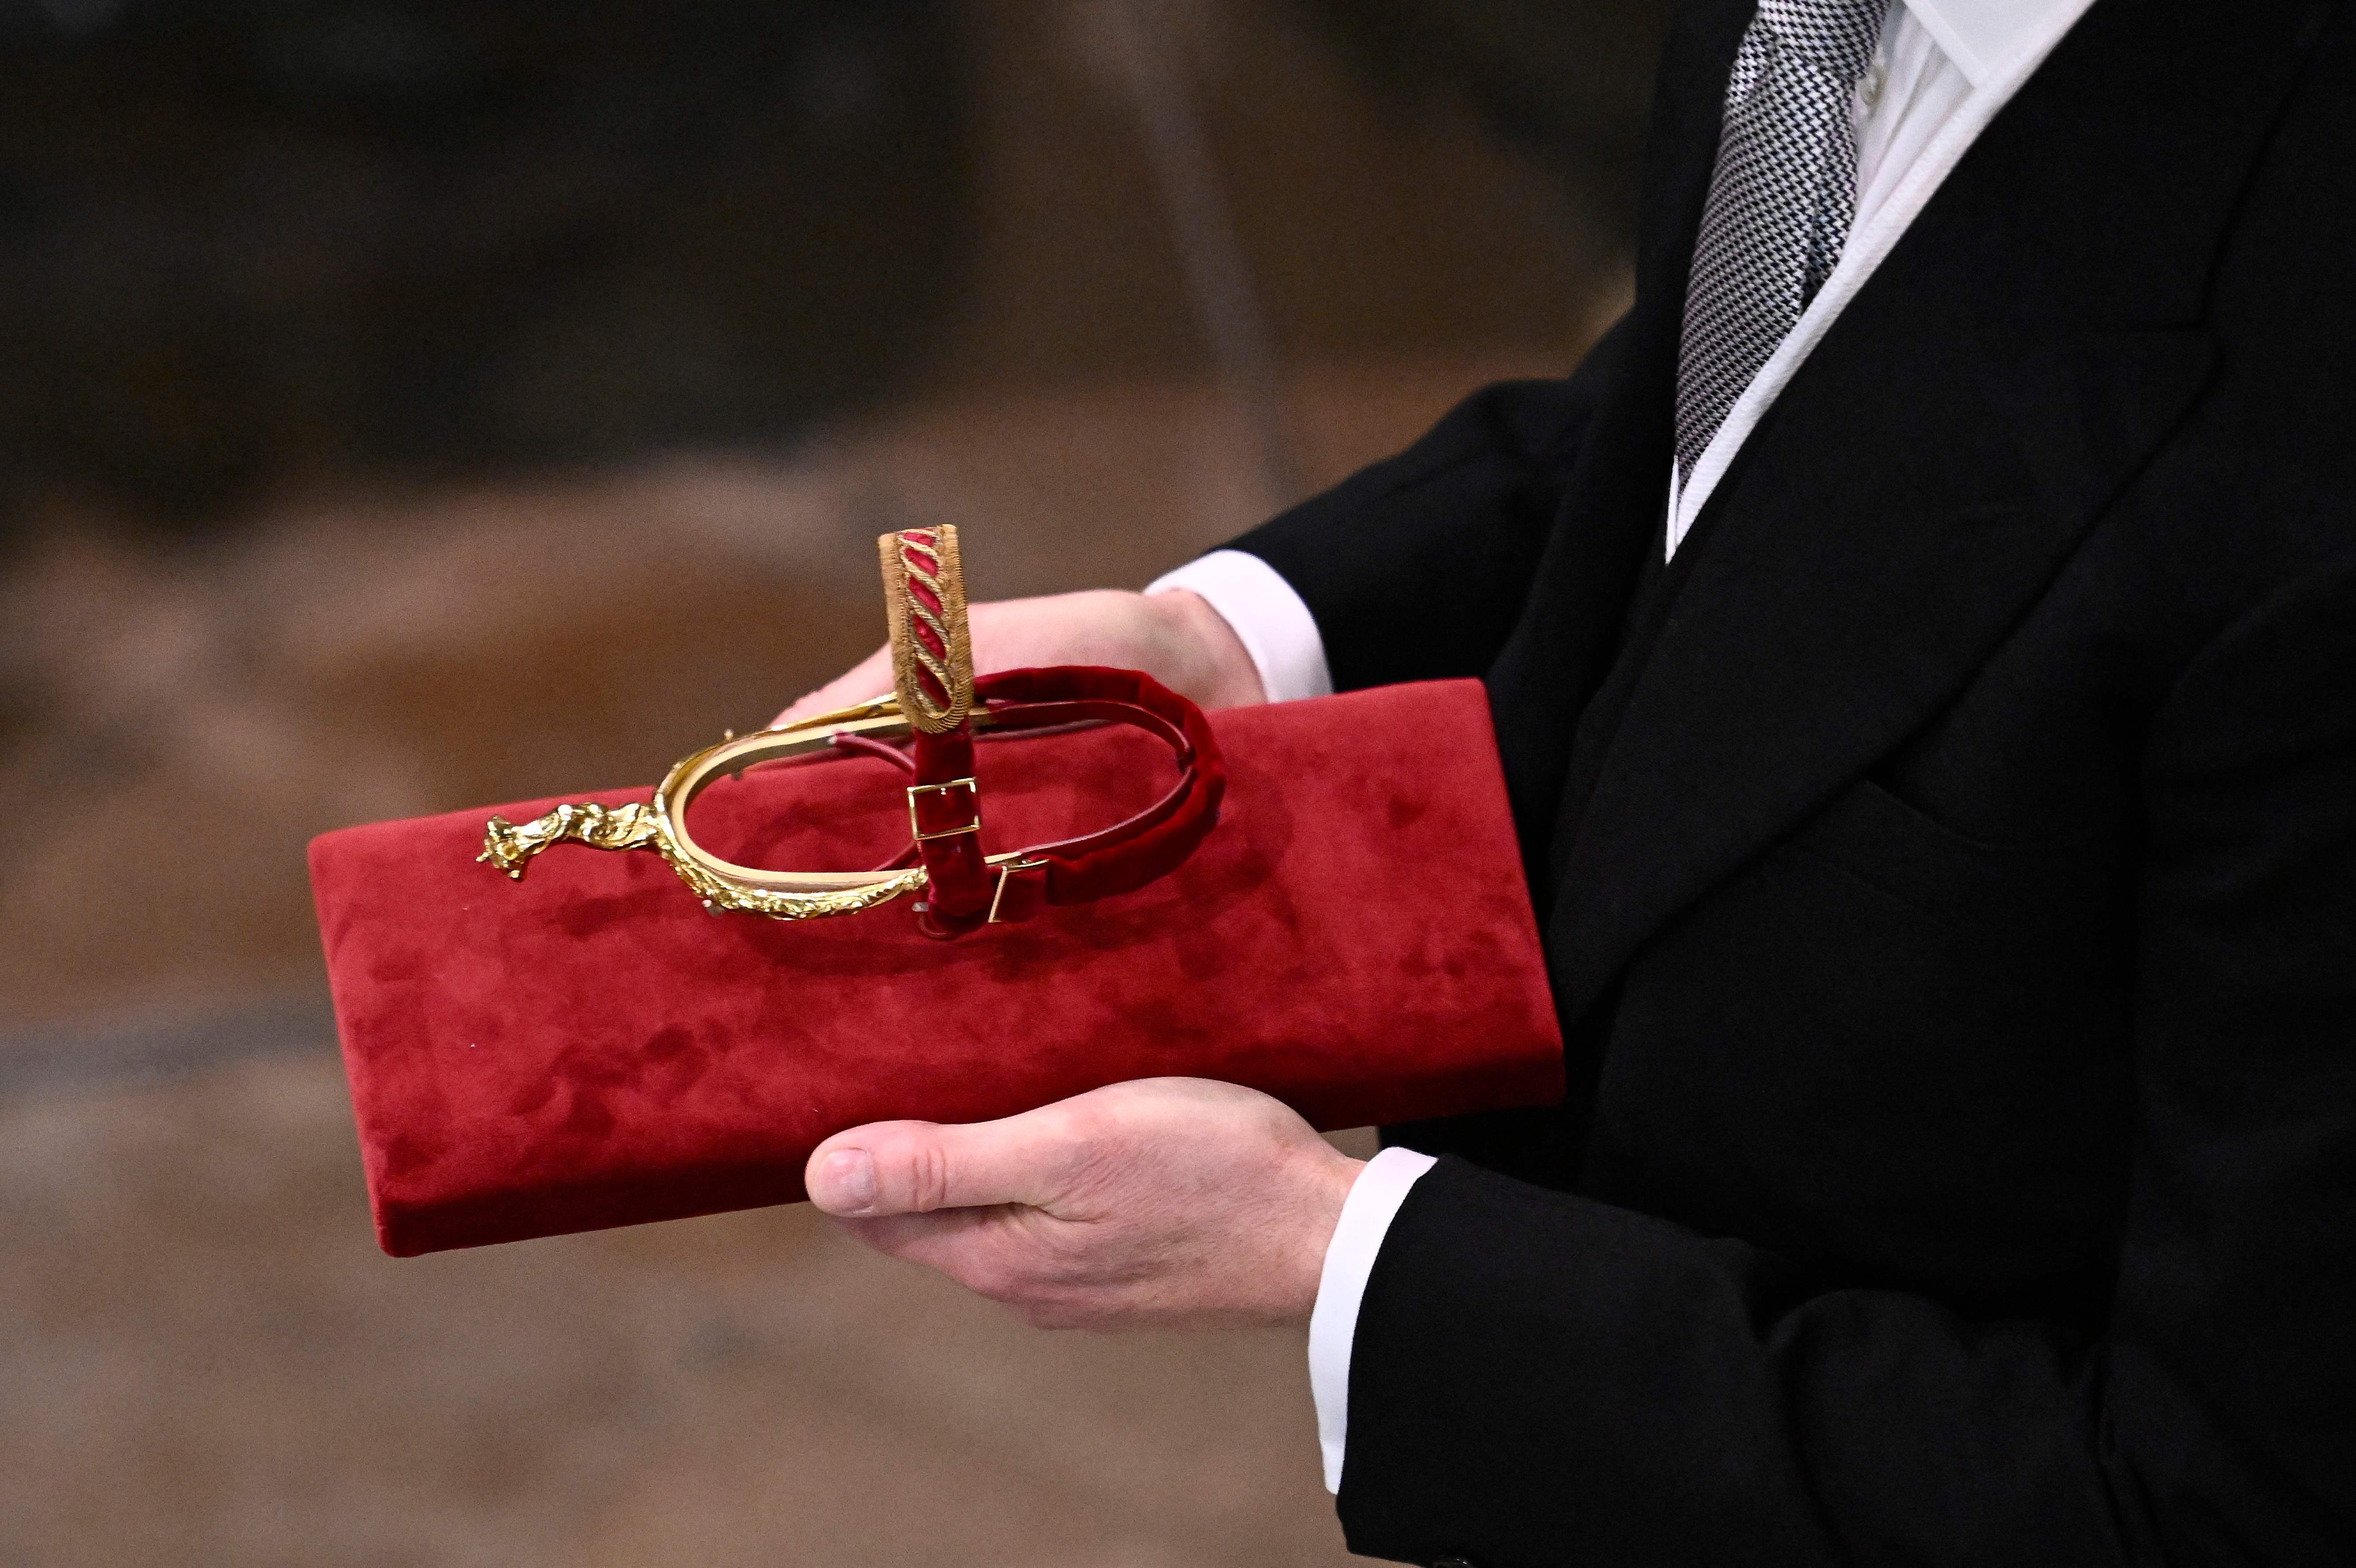 Ancient traditional instruments are being brought in for the coronation of King Charles